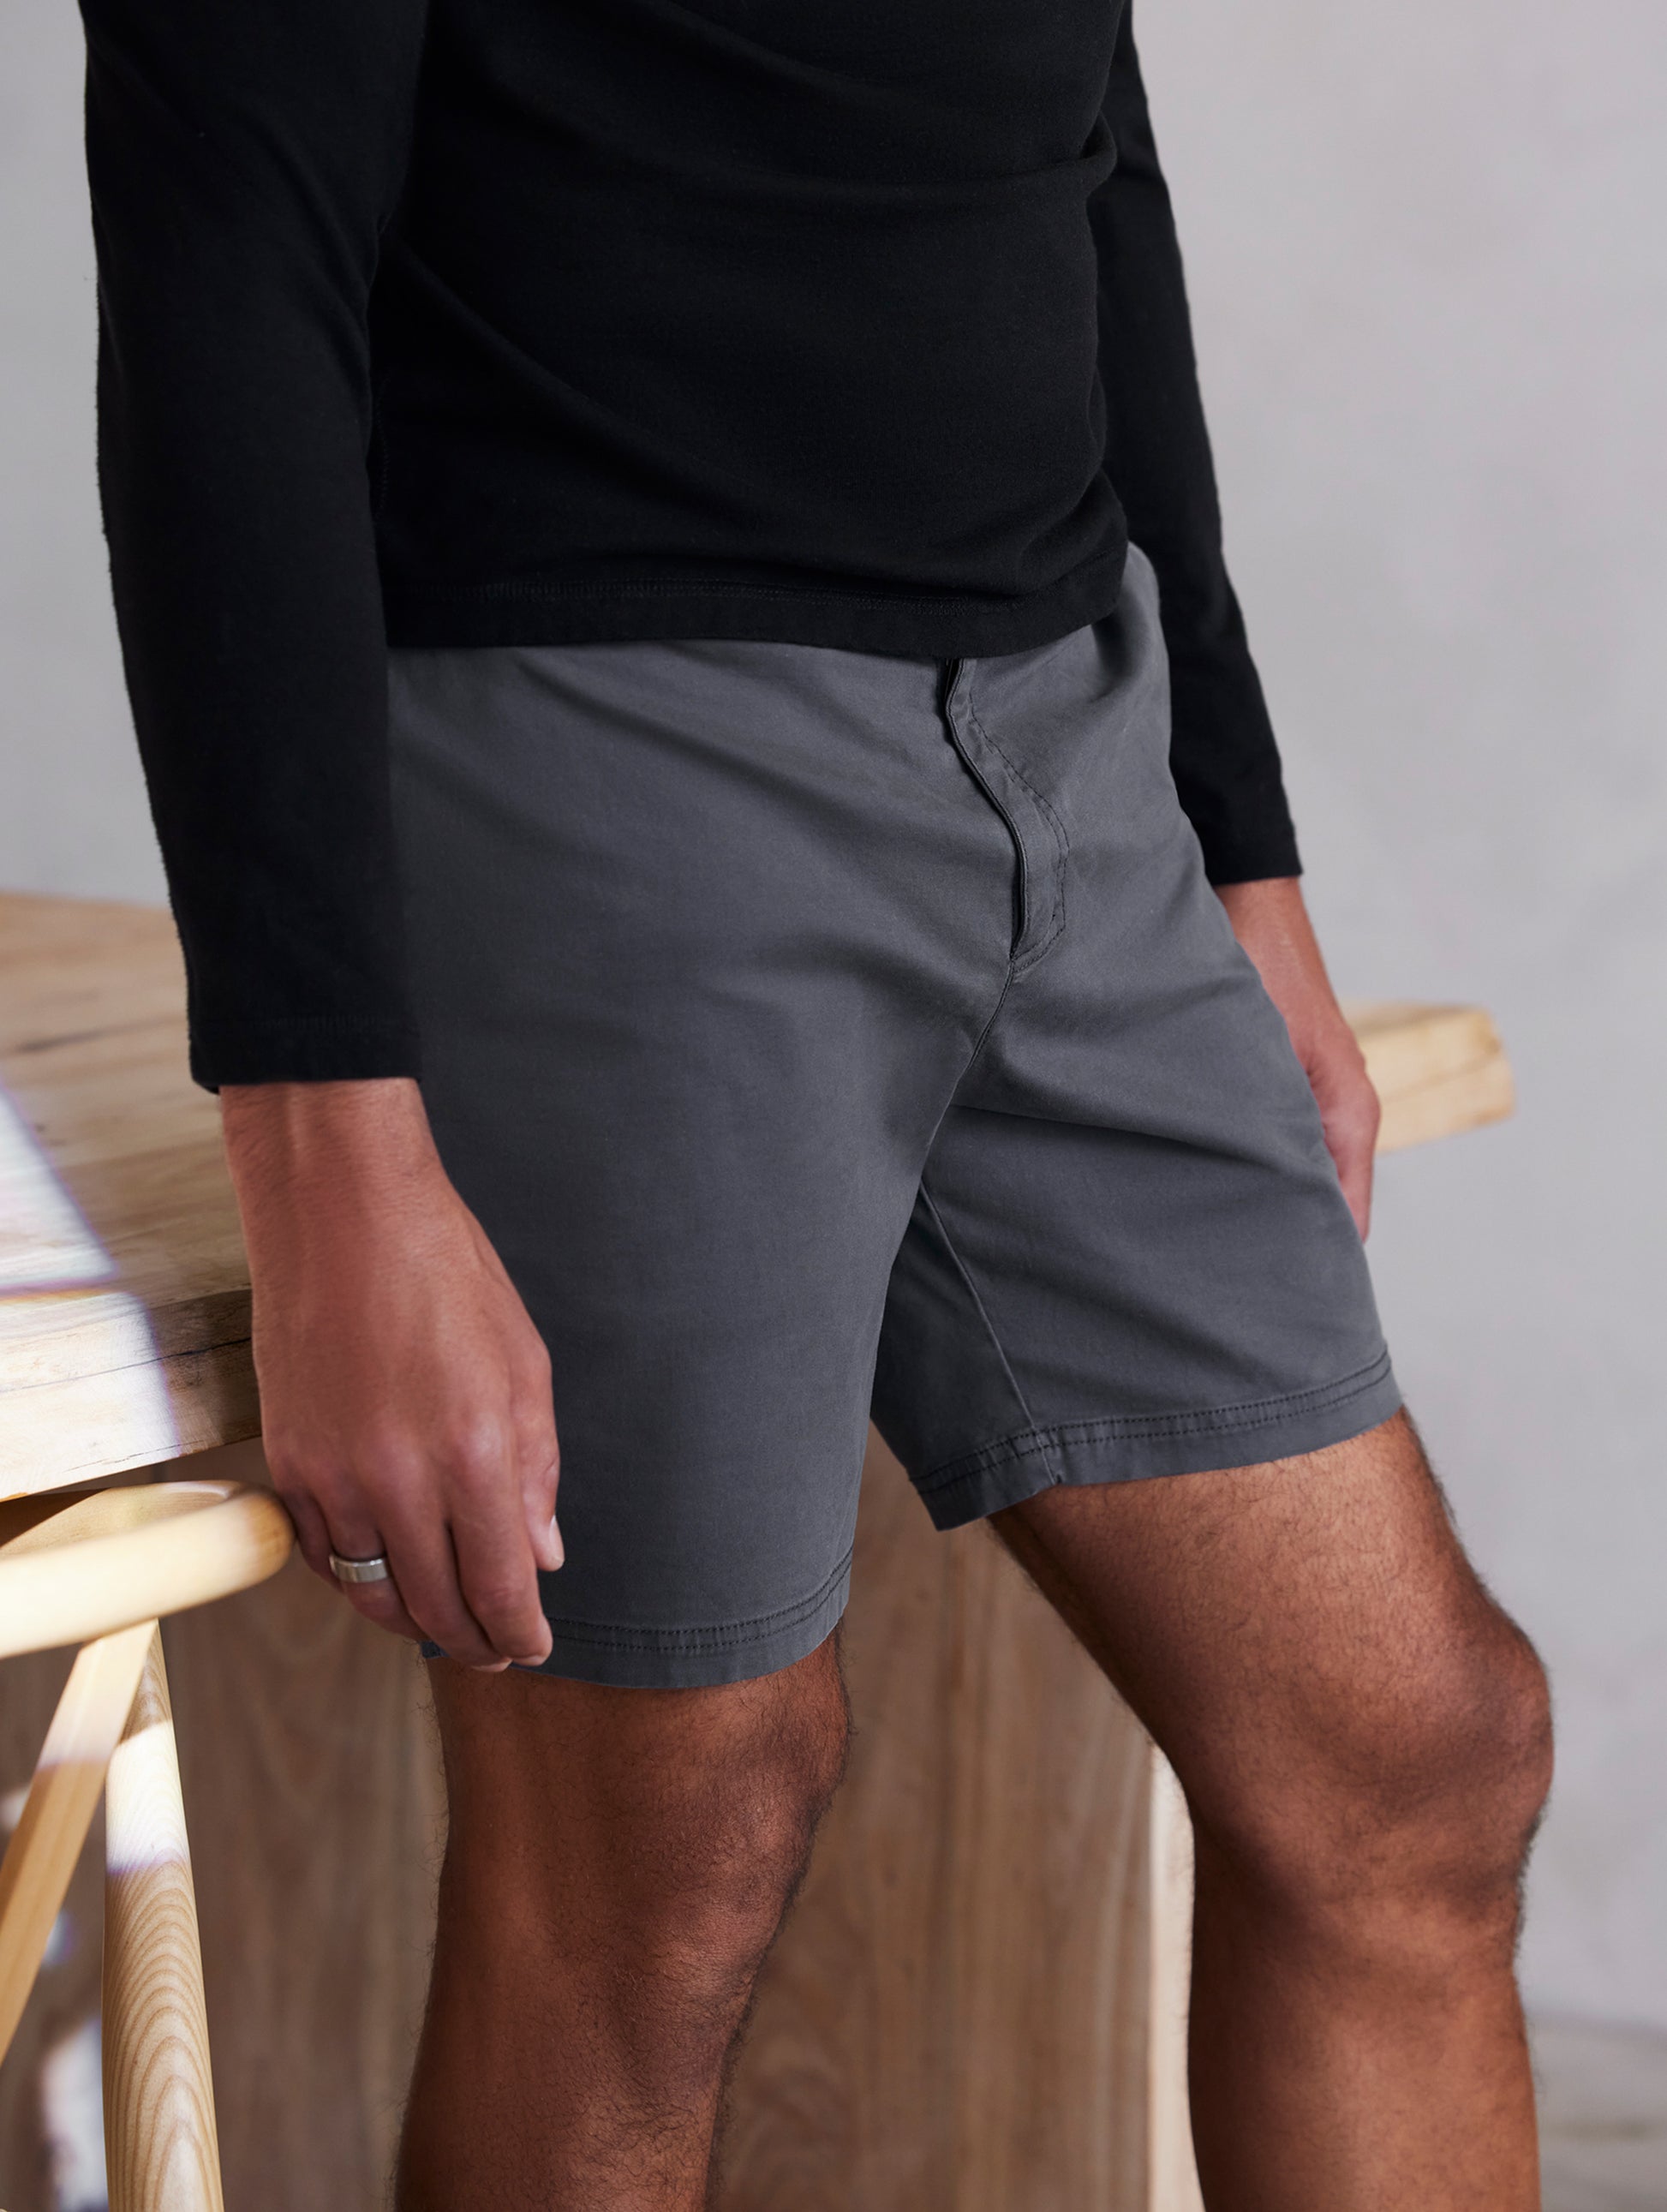 man wearing grey shorts from AETHER Apparel.